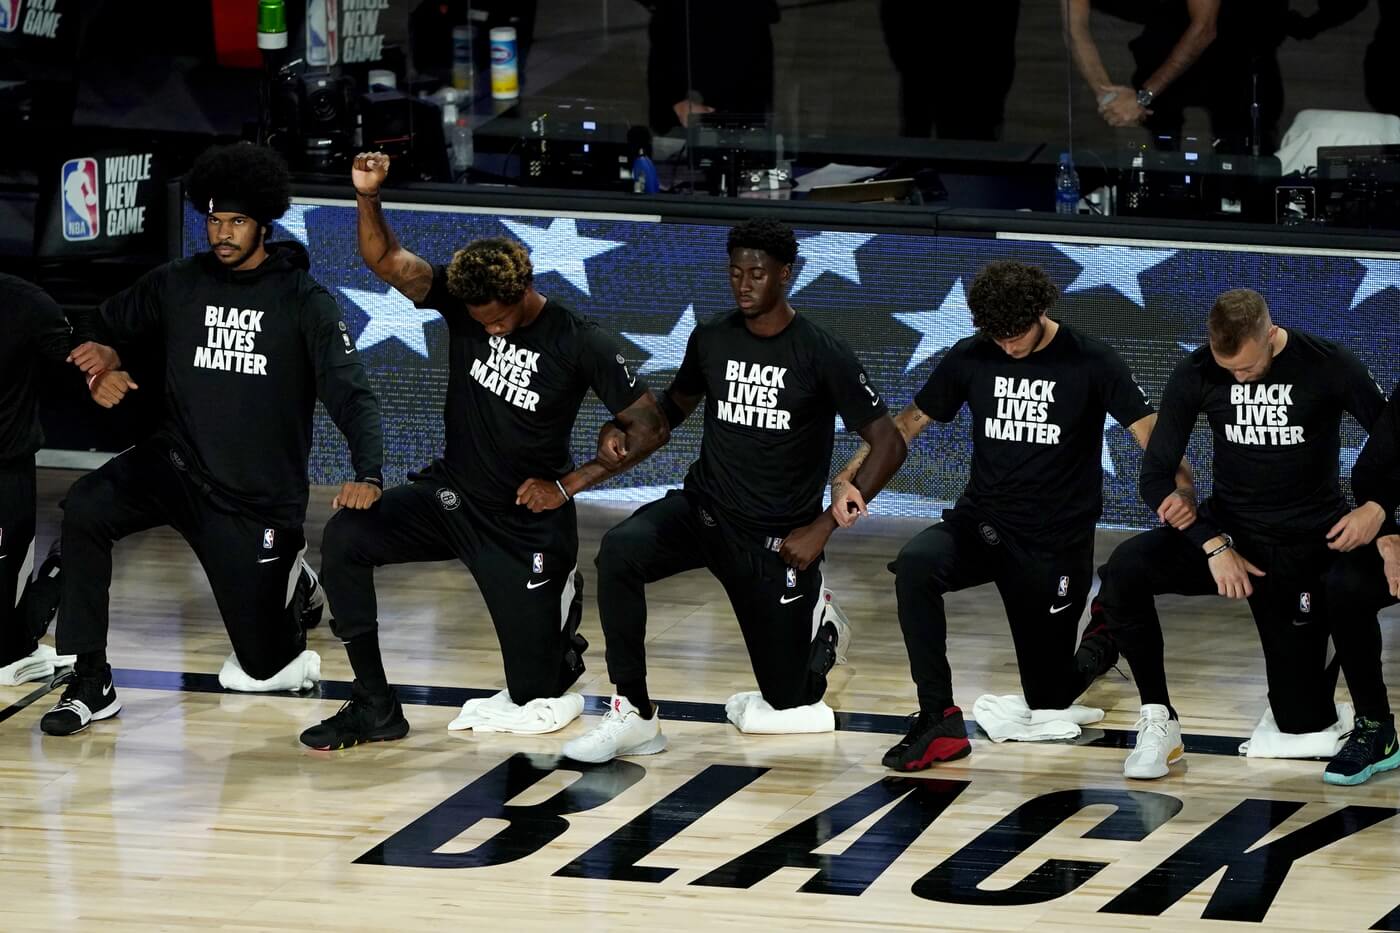 ooklyn Nets Lance Thomas, second from left, gestures as he and teammates kneel in honor of the Black Lives Matter movement prior to an NBA basketball game against the Portland Trail Blazers at ESPN Wide World of Sports Complex.